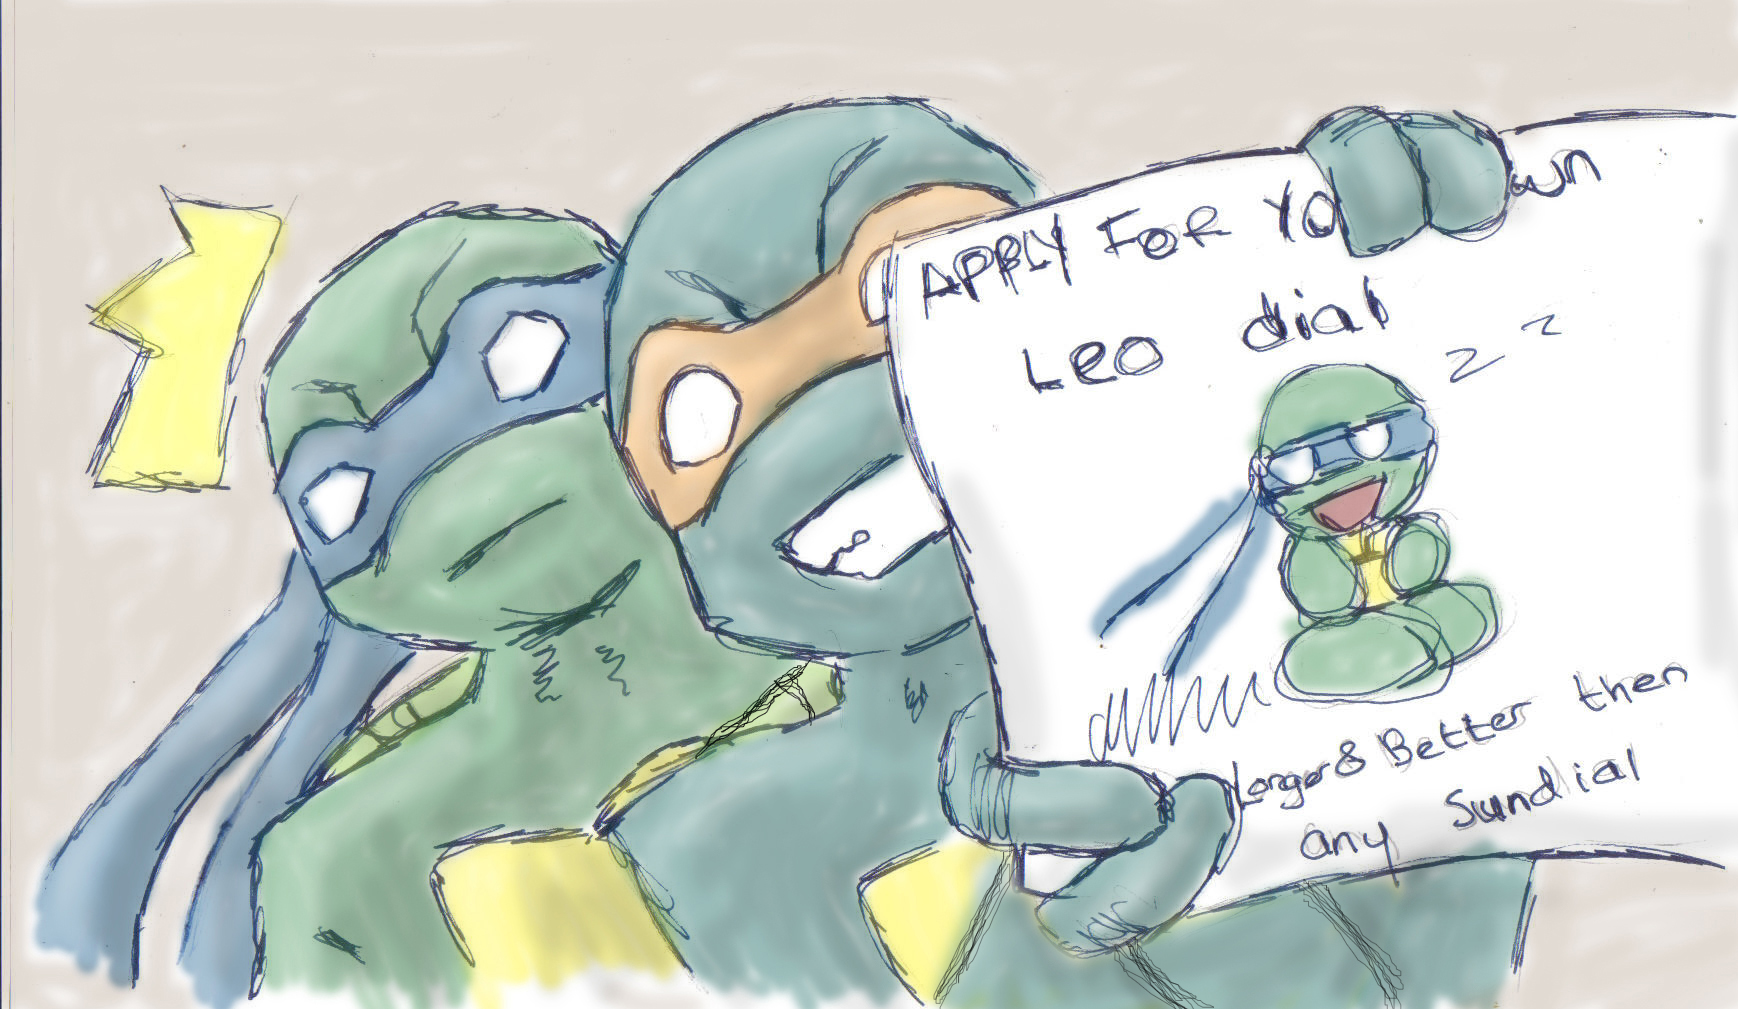 TMNT: Advertise by rufus008